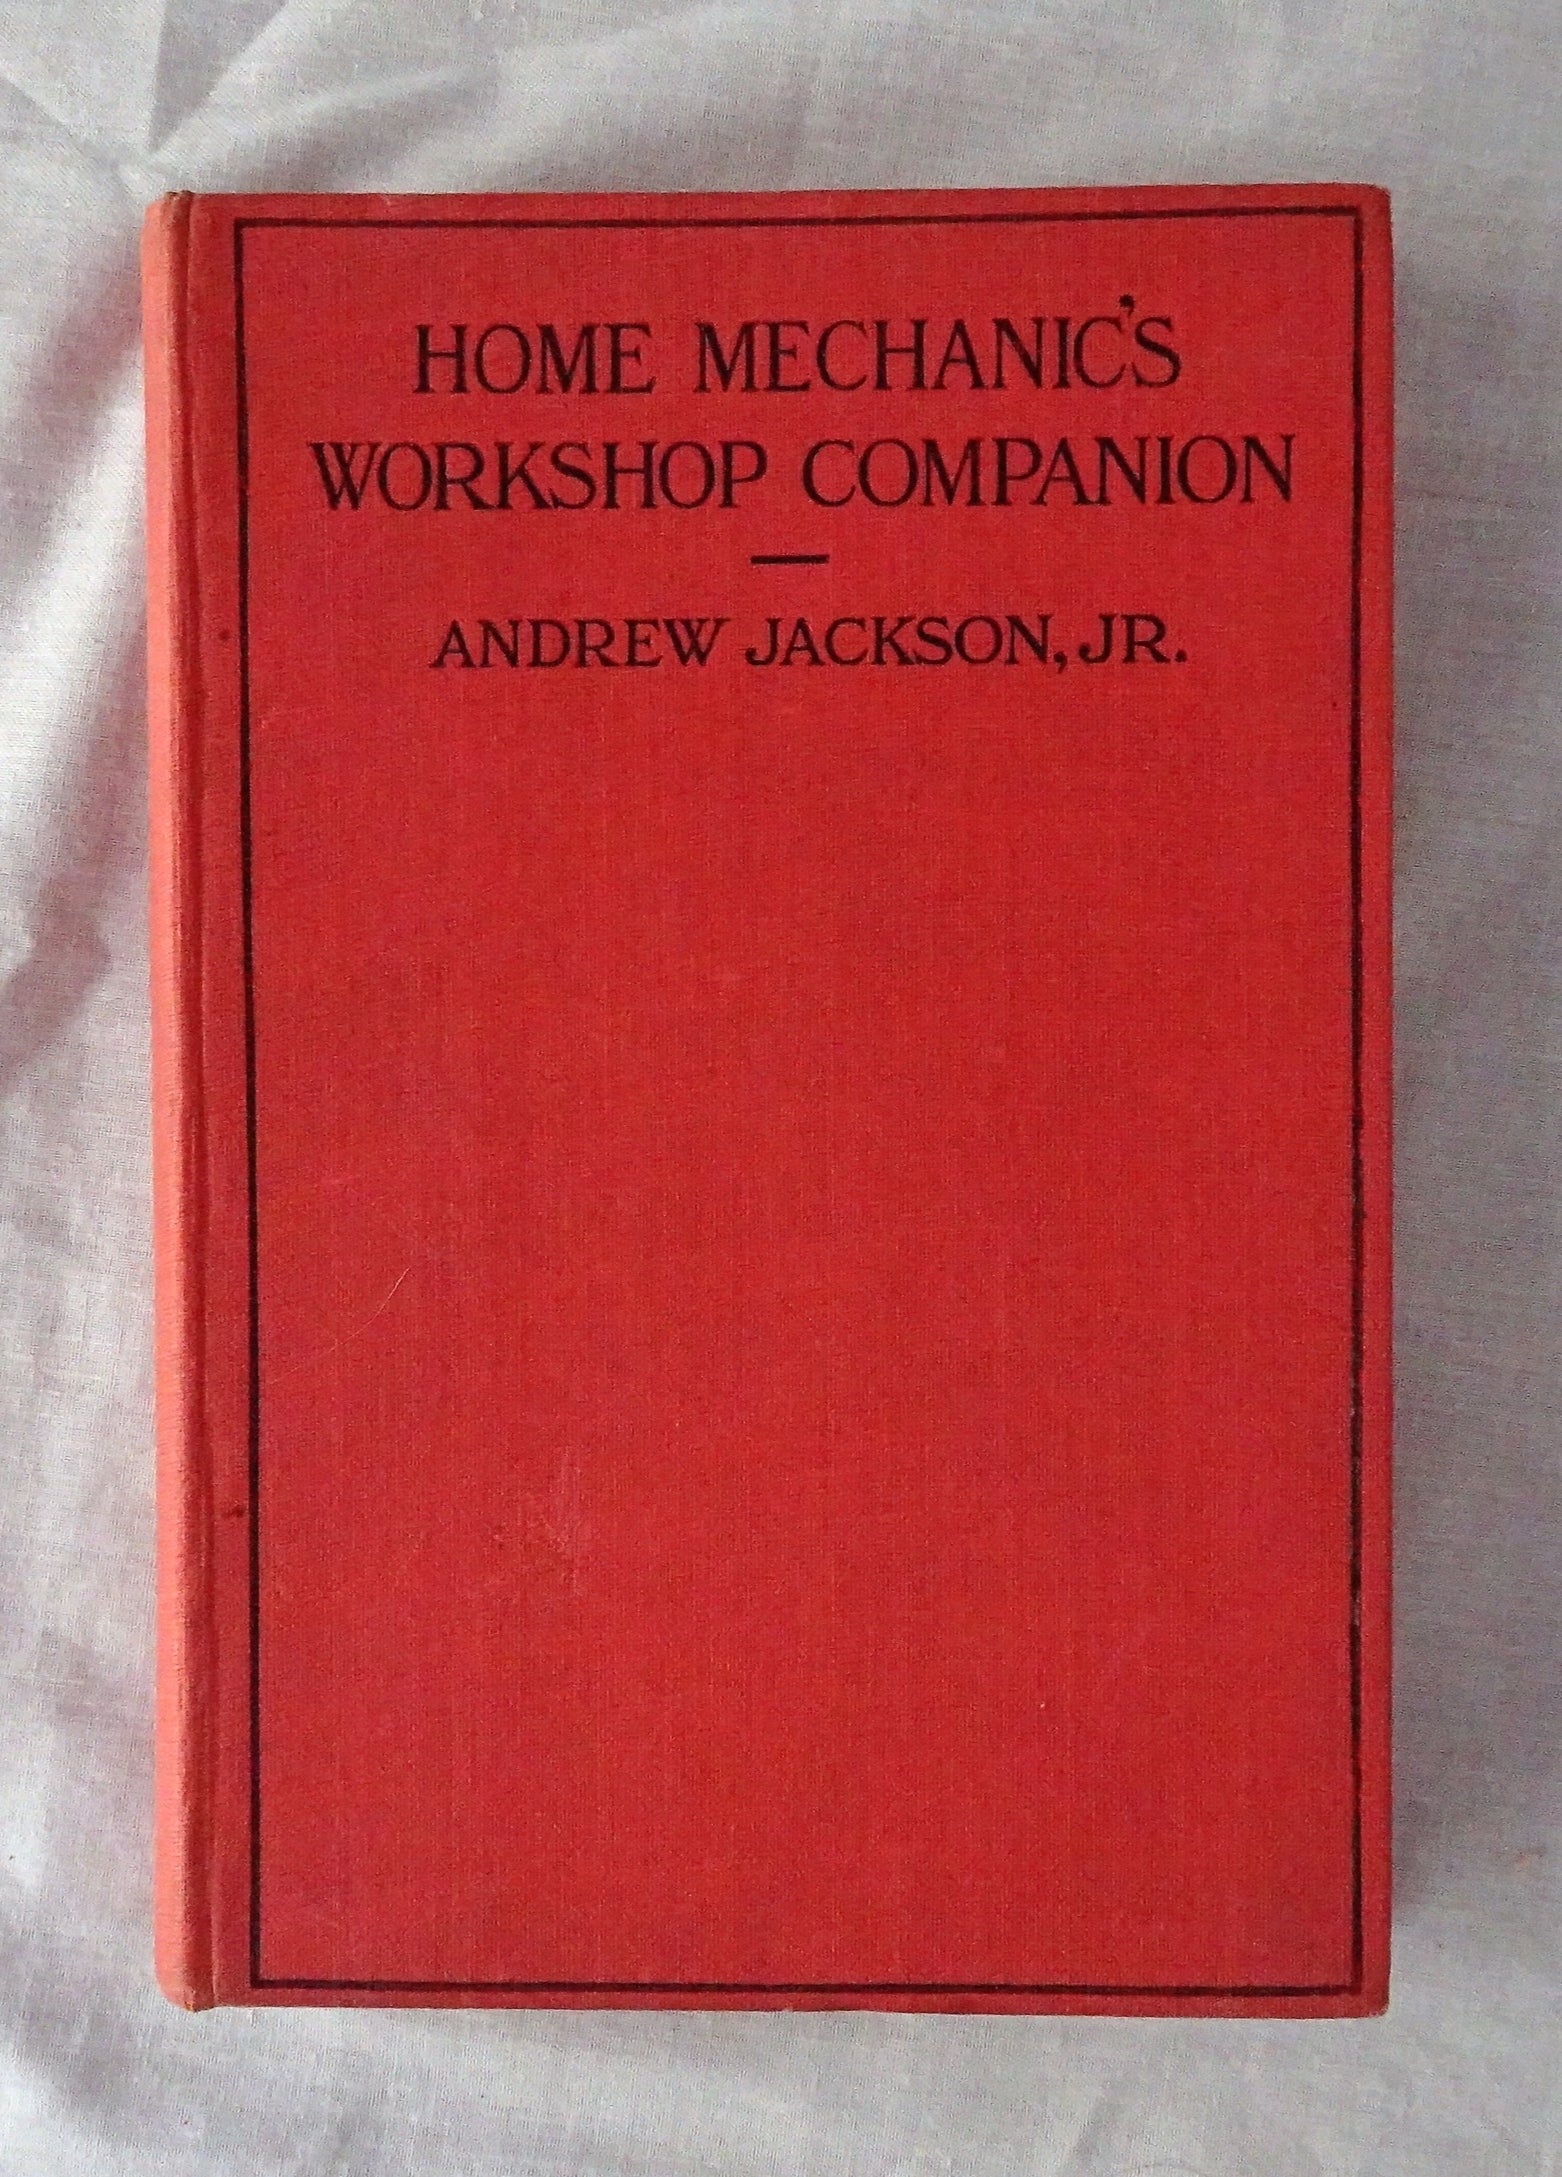 Home Mechanic’s Workshop Companion by Andrew Jackson